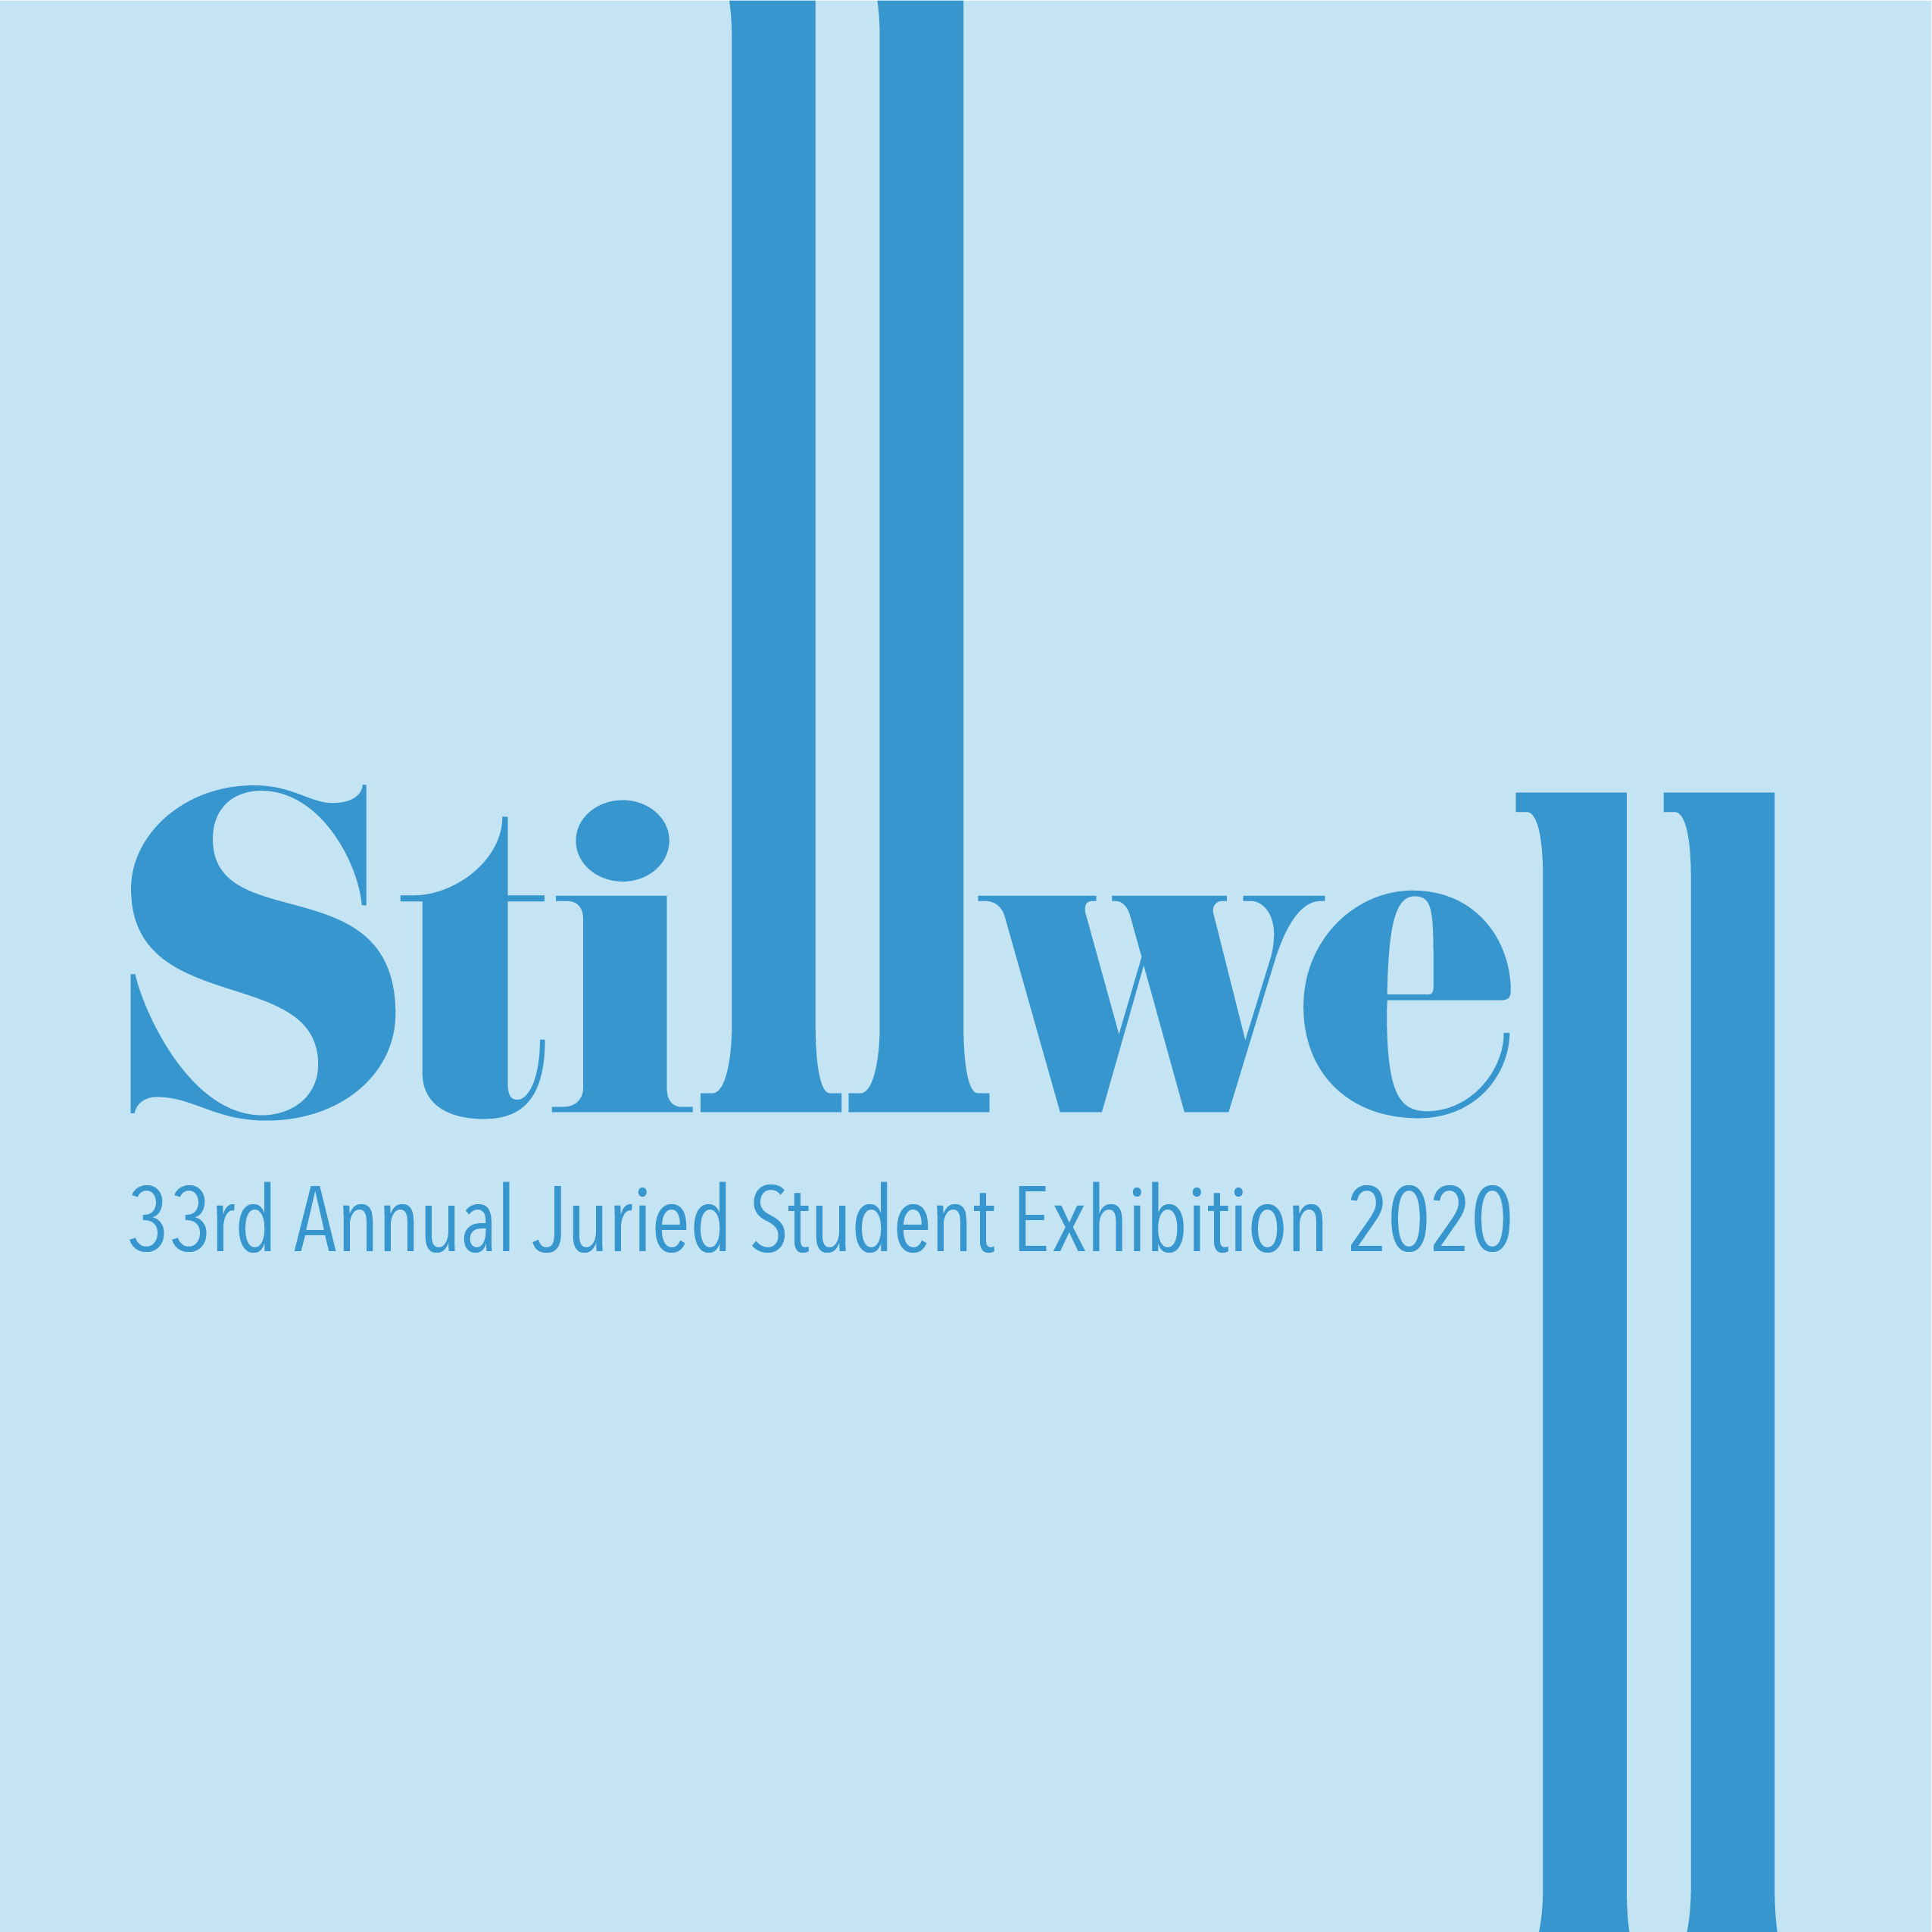 Stillwell: 33rd annual juried student exhibition 2020